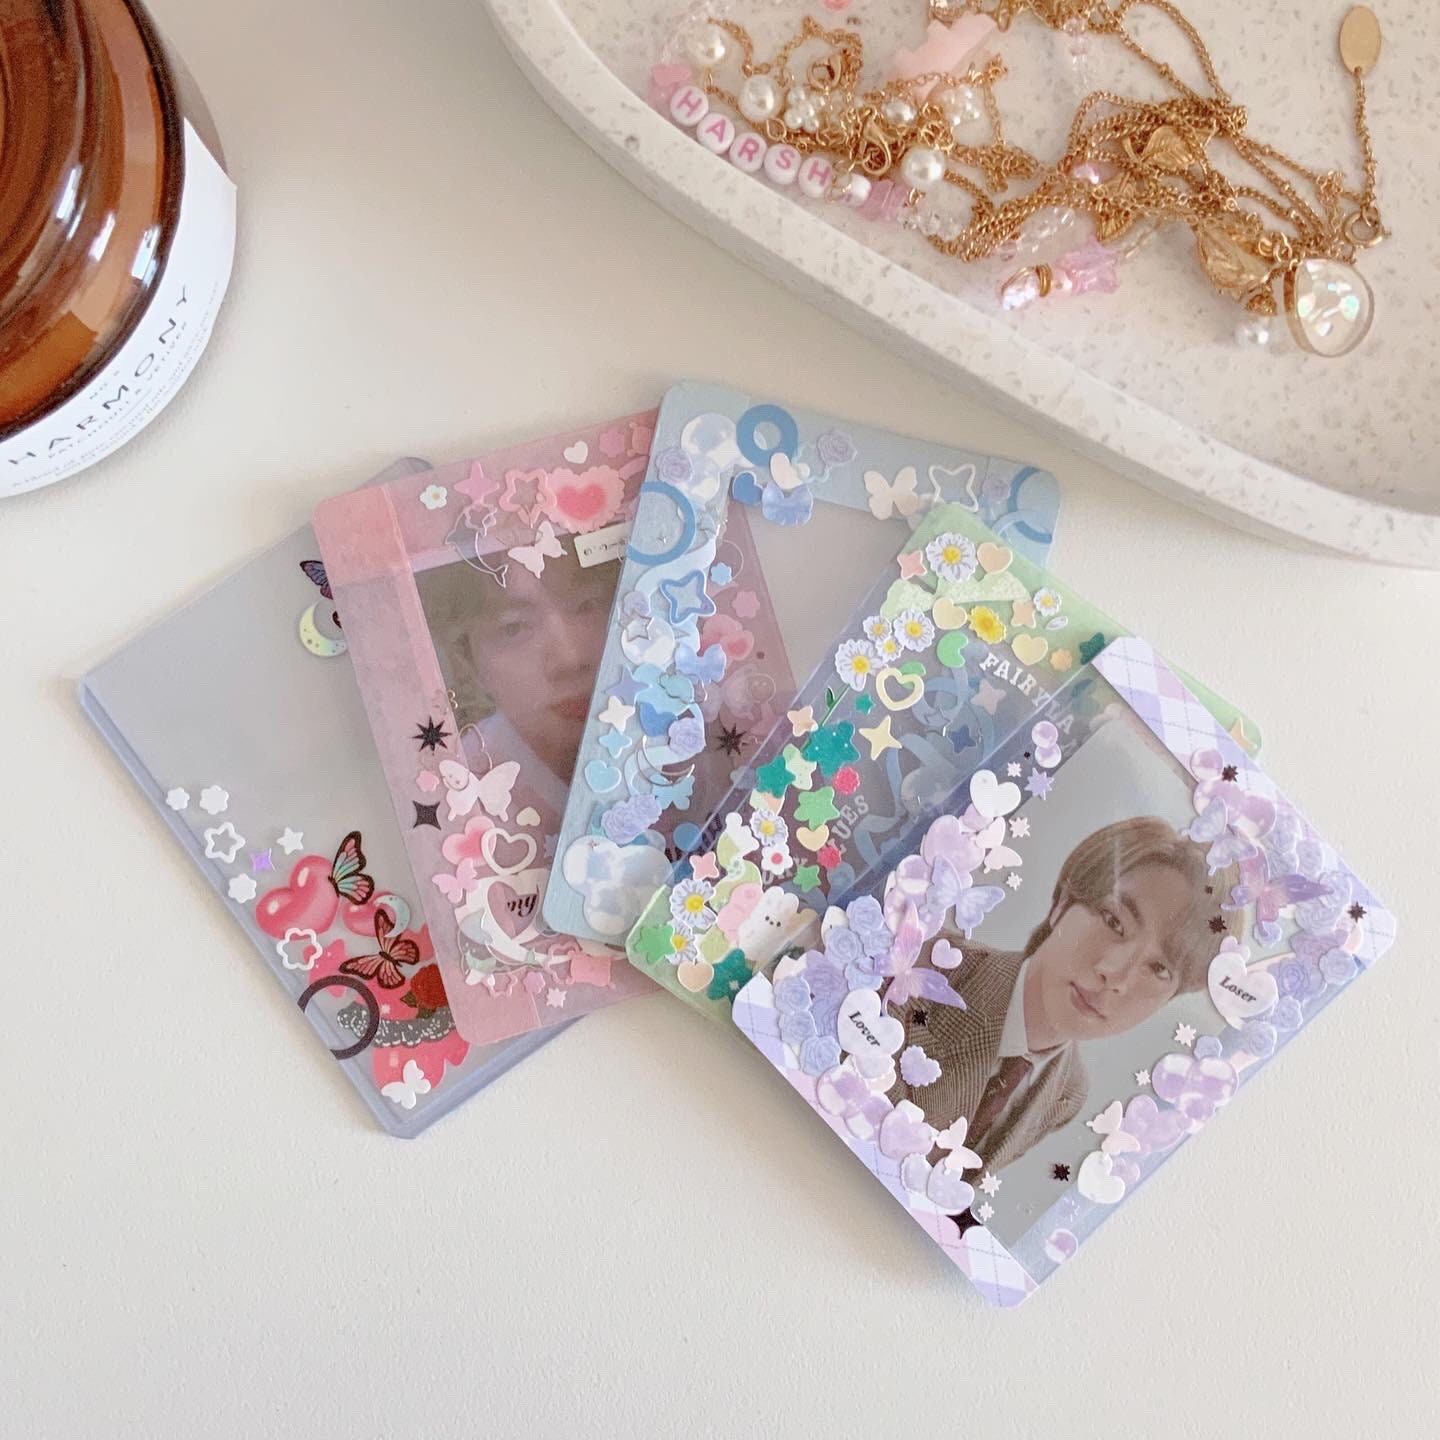 hey! just wanted to share my kpop deco shop! i have toploaders